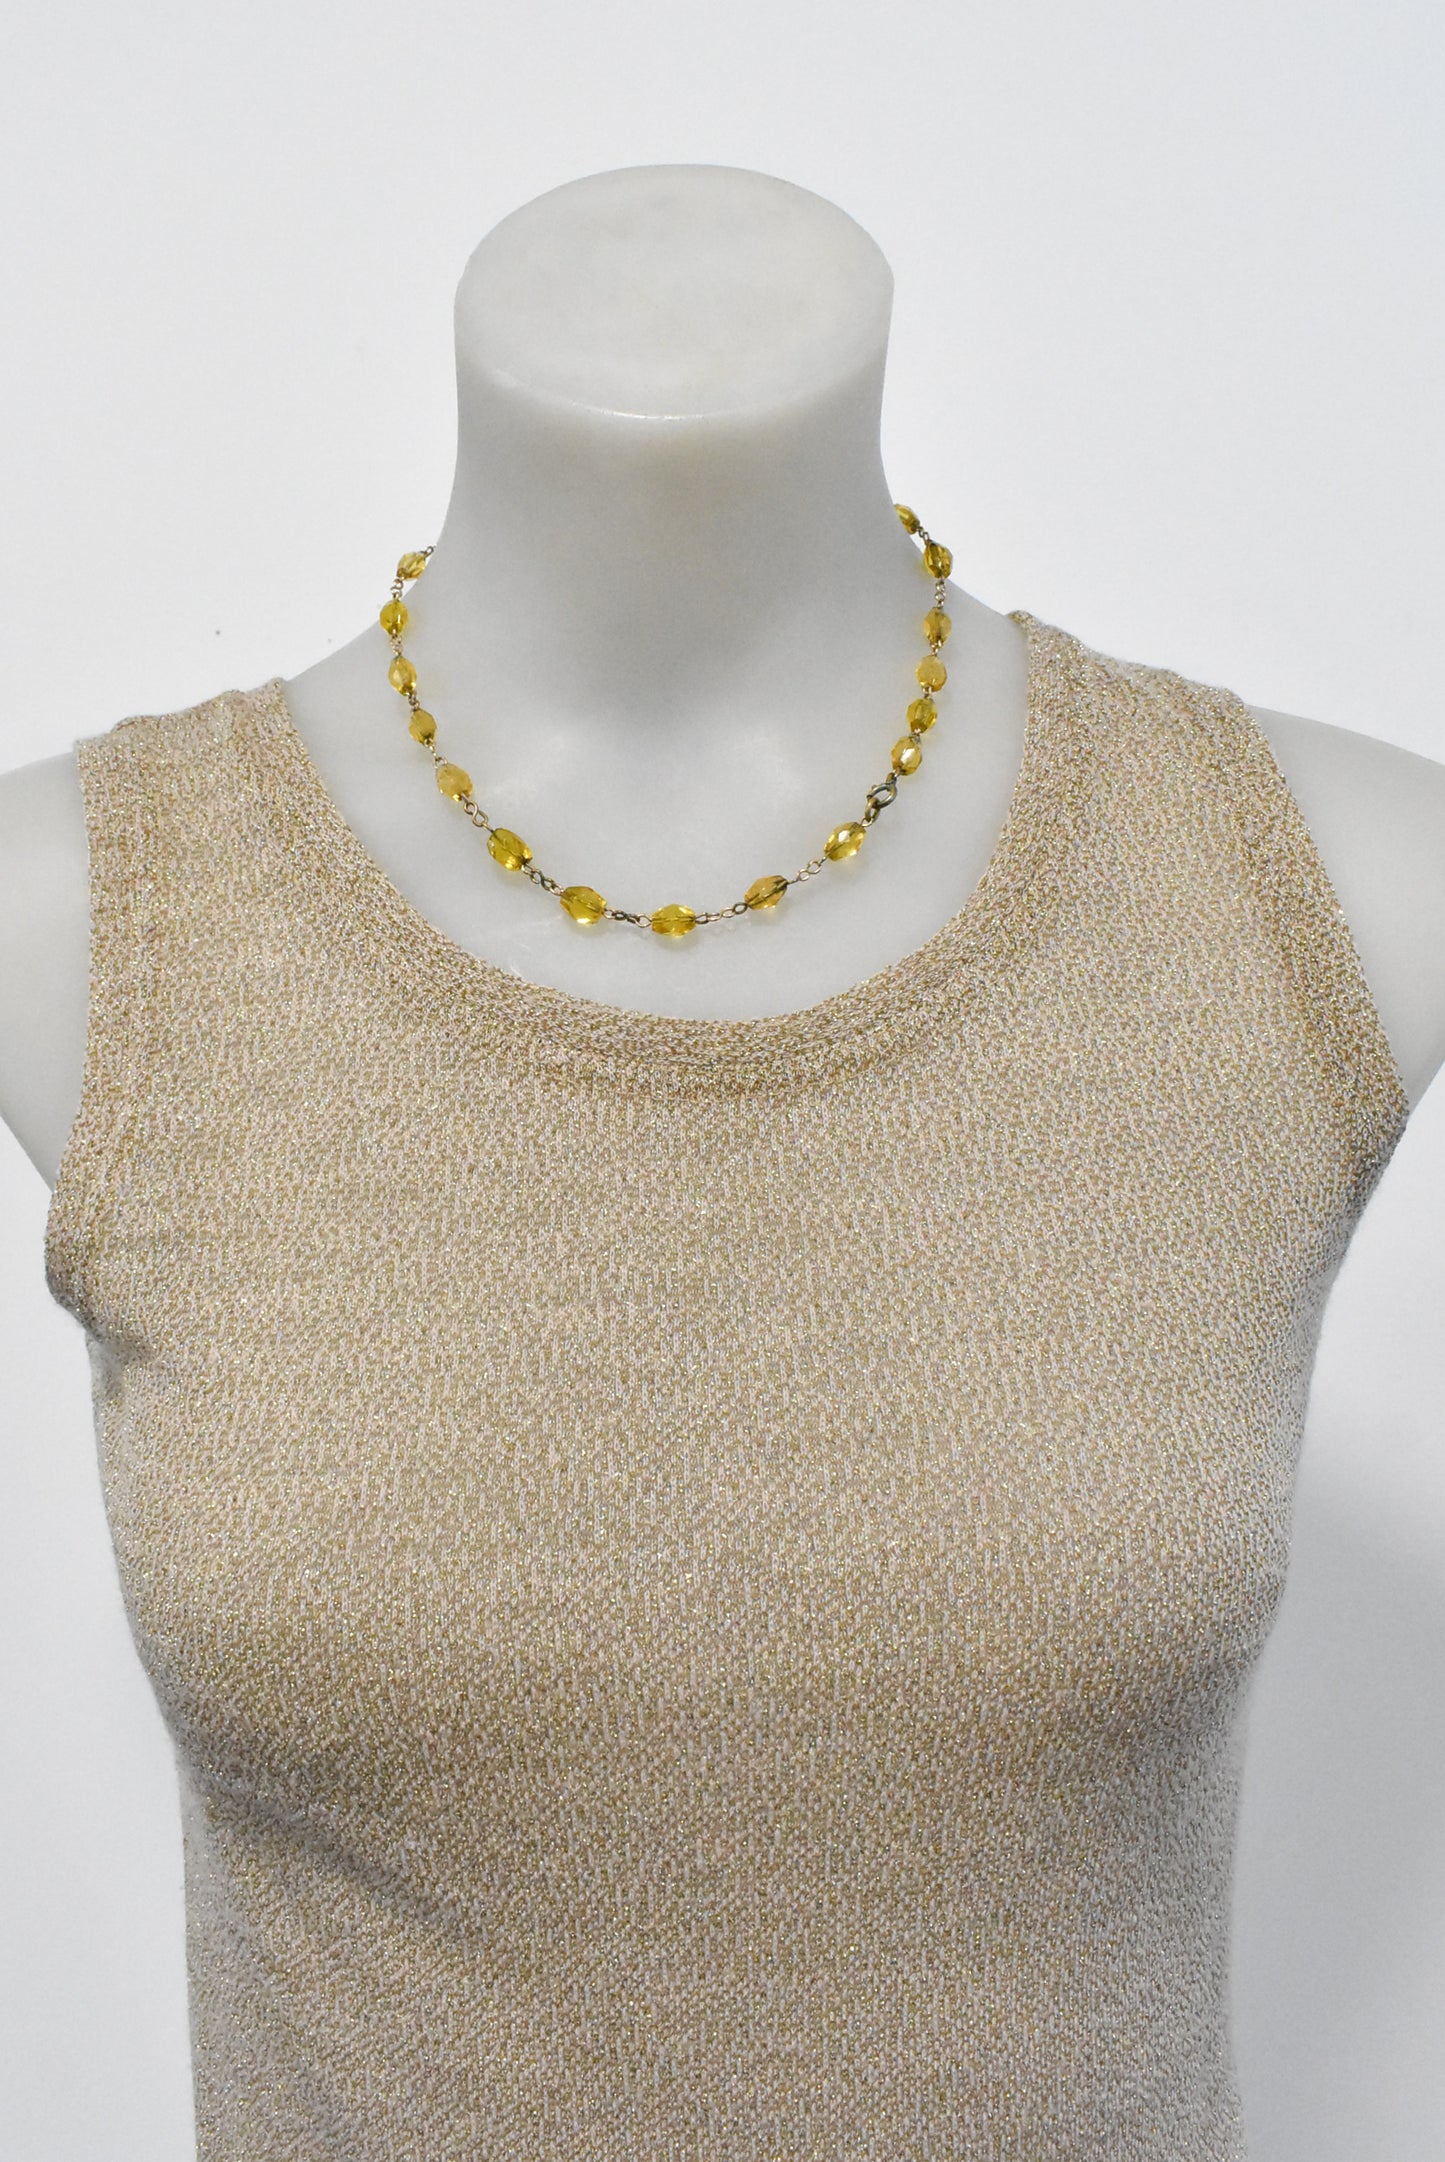 Yellow Glass Bead Necklace